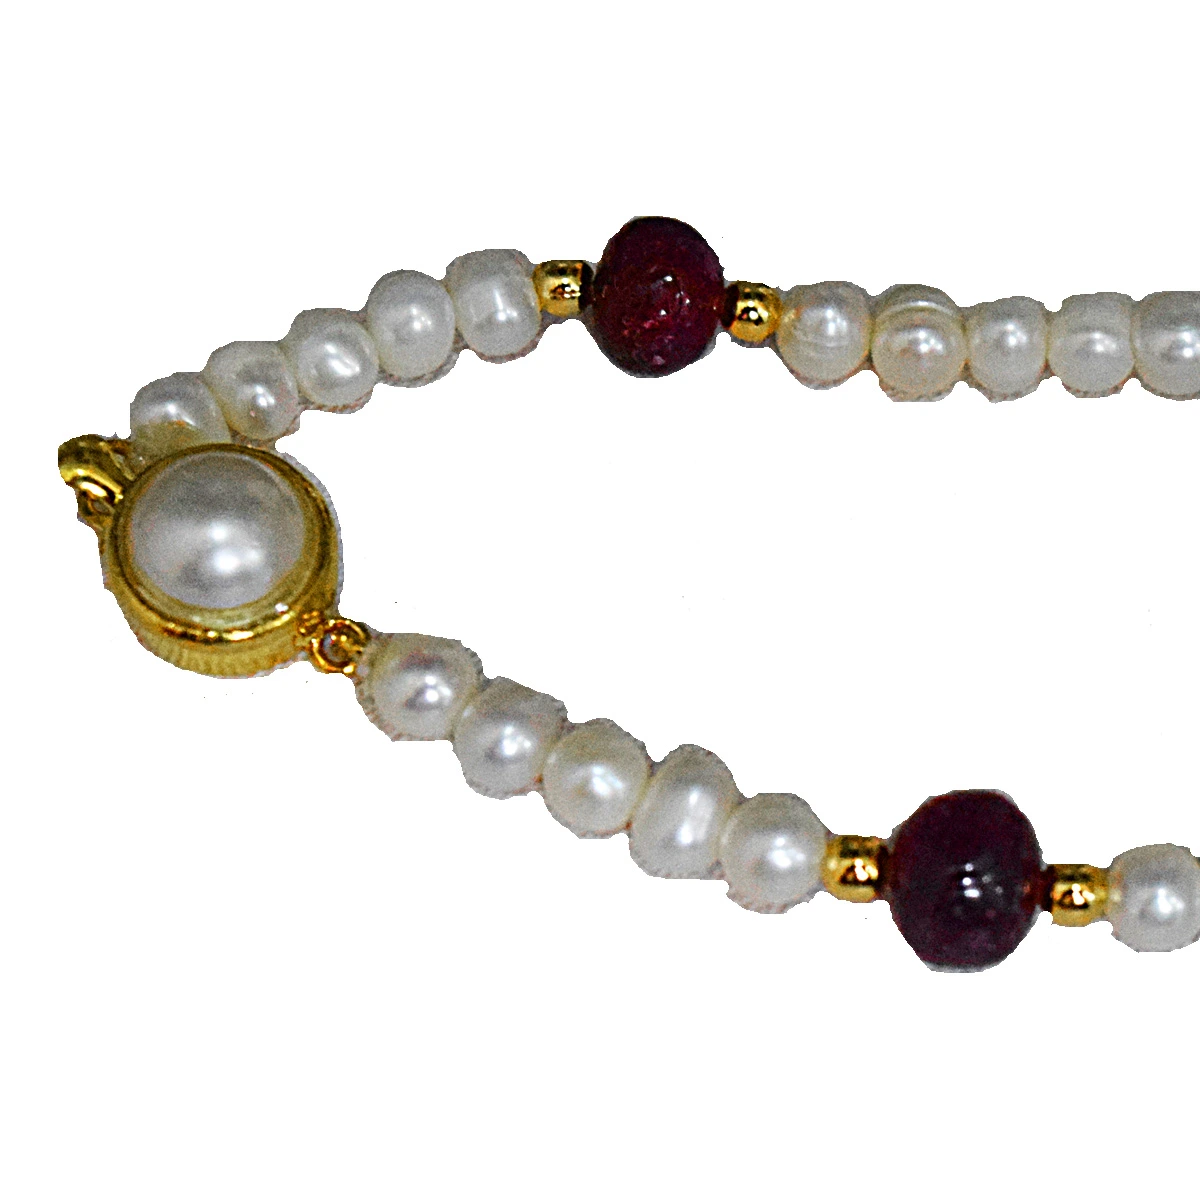 4 Real Red Button Ruby, Freshwater Pearl & Gold Plated Bracelet for Women (SB59)